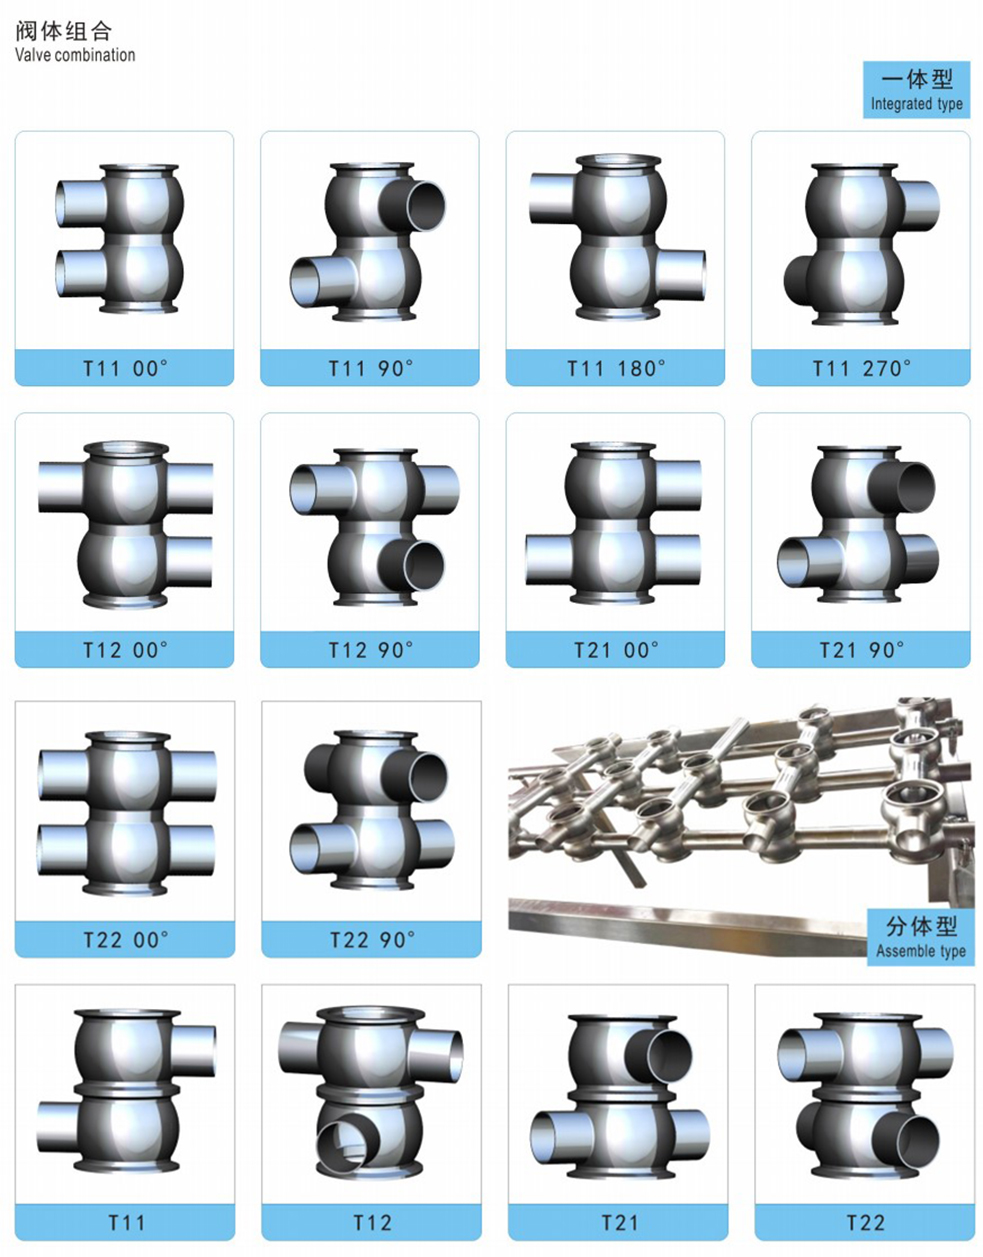 Body Type of Stainless Steel Sanitary Mixproof Valves